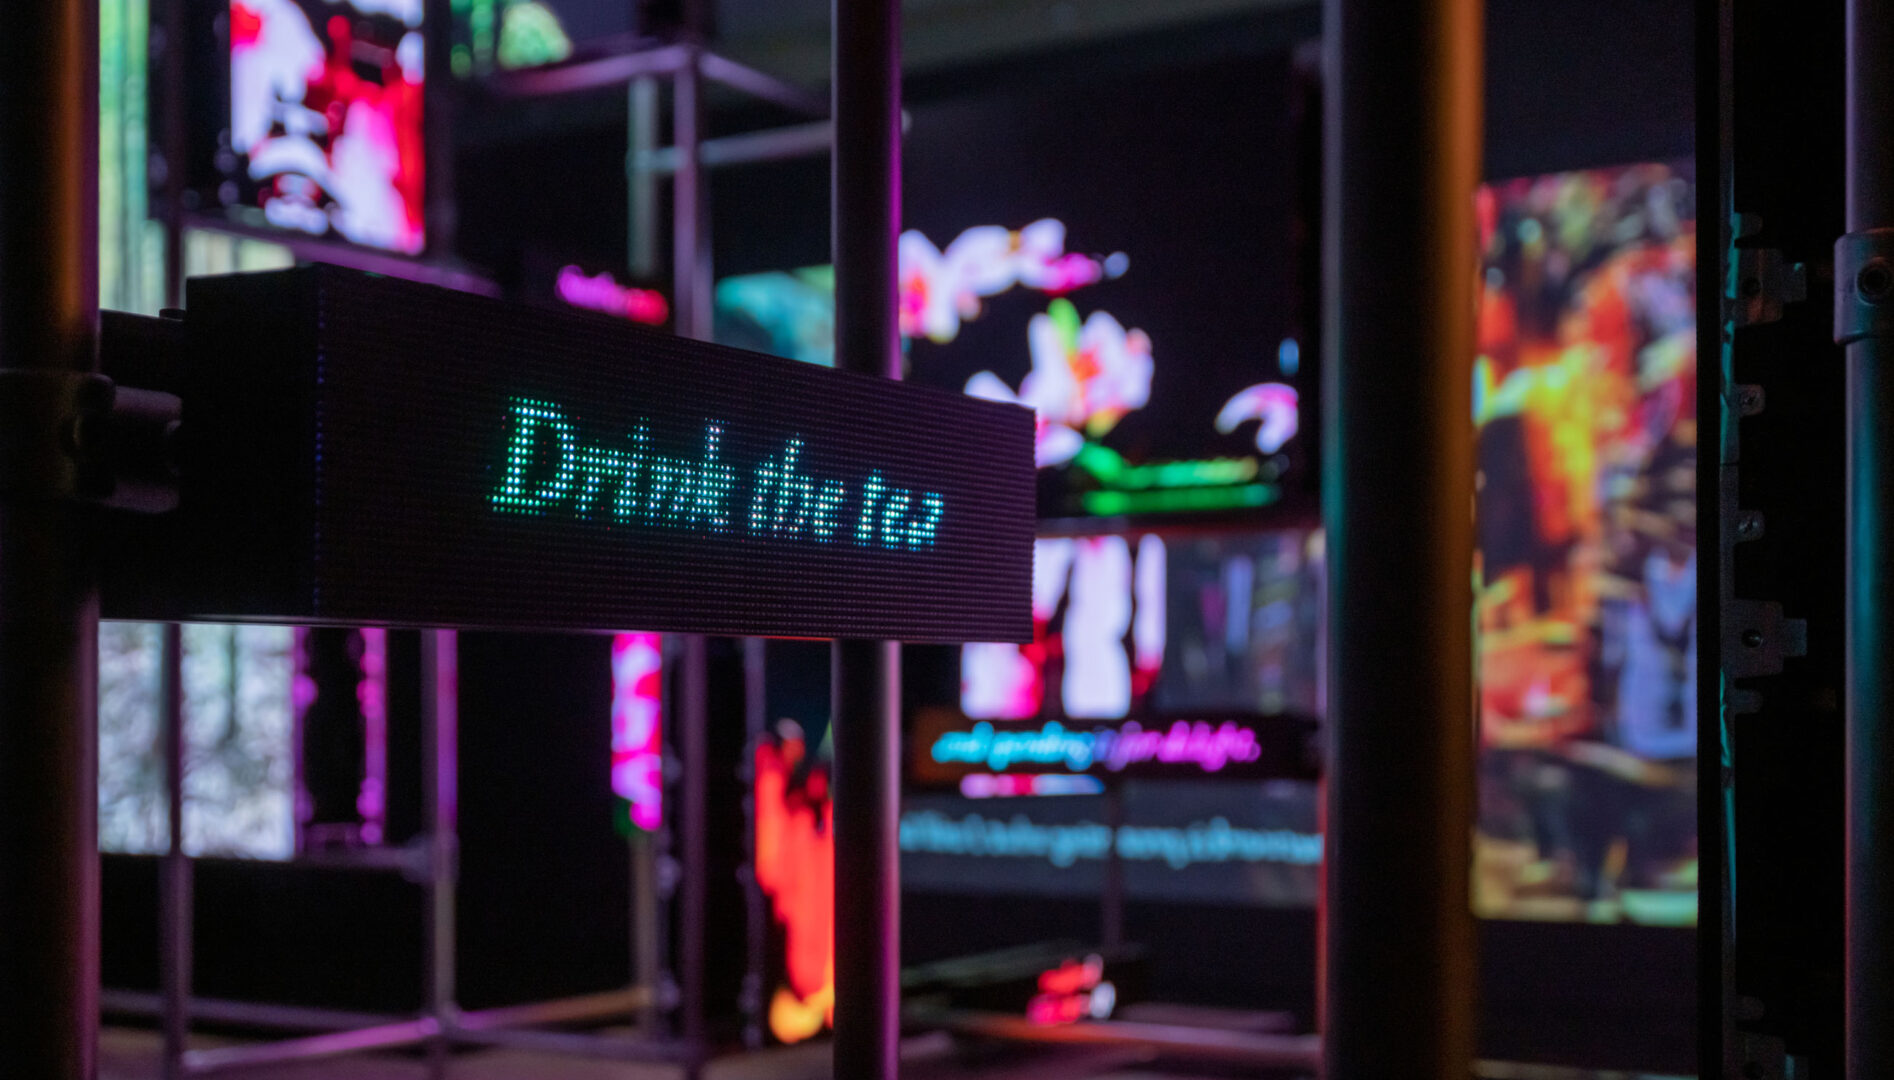 A dark gallery with various screens showing AI flowers and a pixelated screen that says "Drink the tea" in the foreground